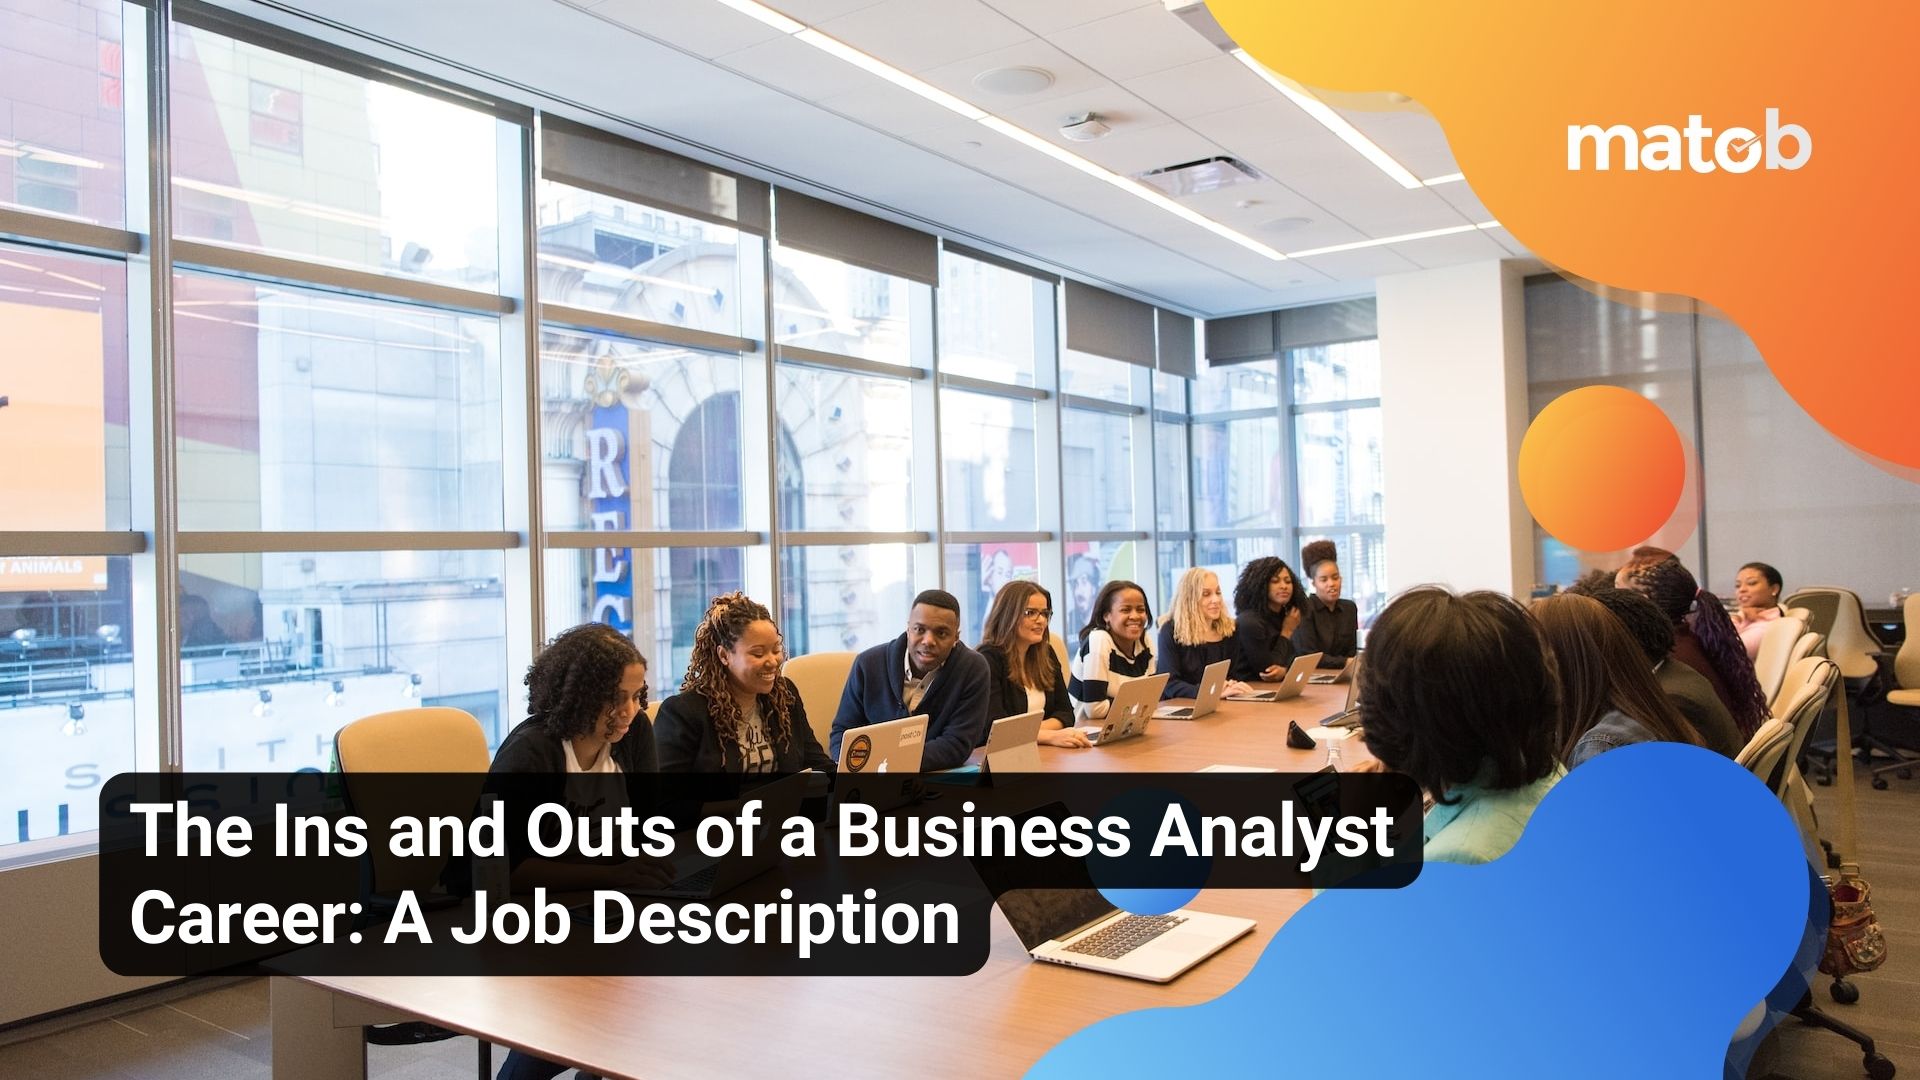 The Ins and Outs of a Business Analyst Career: A Job Description